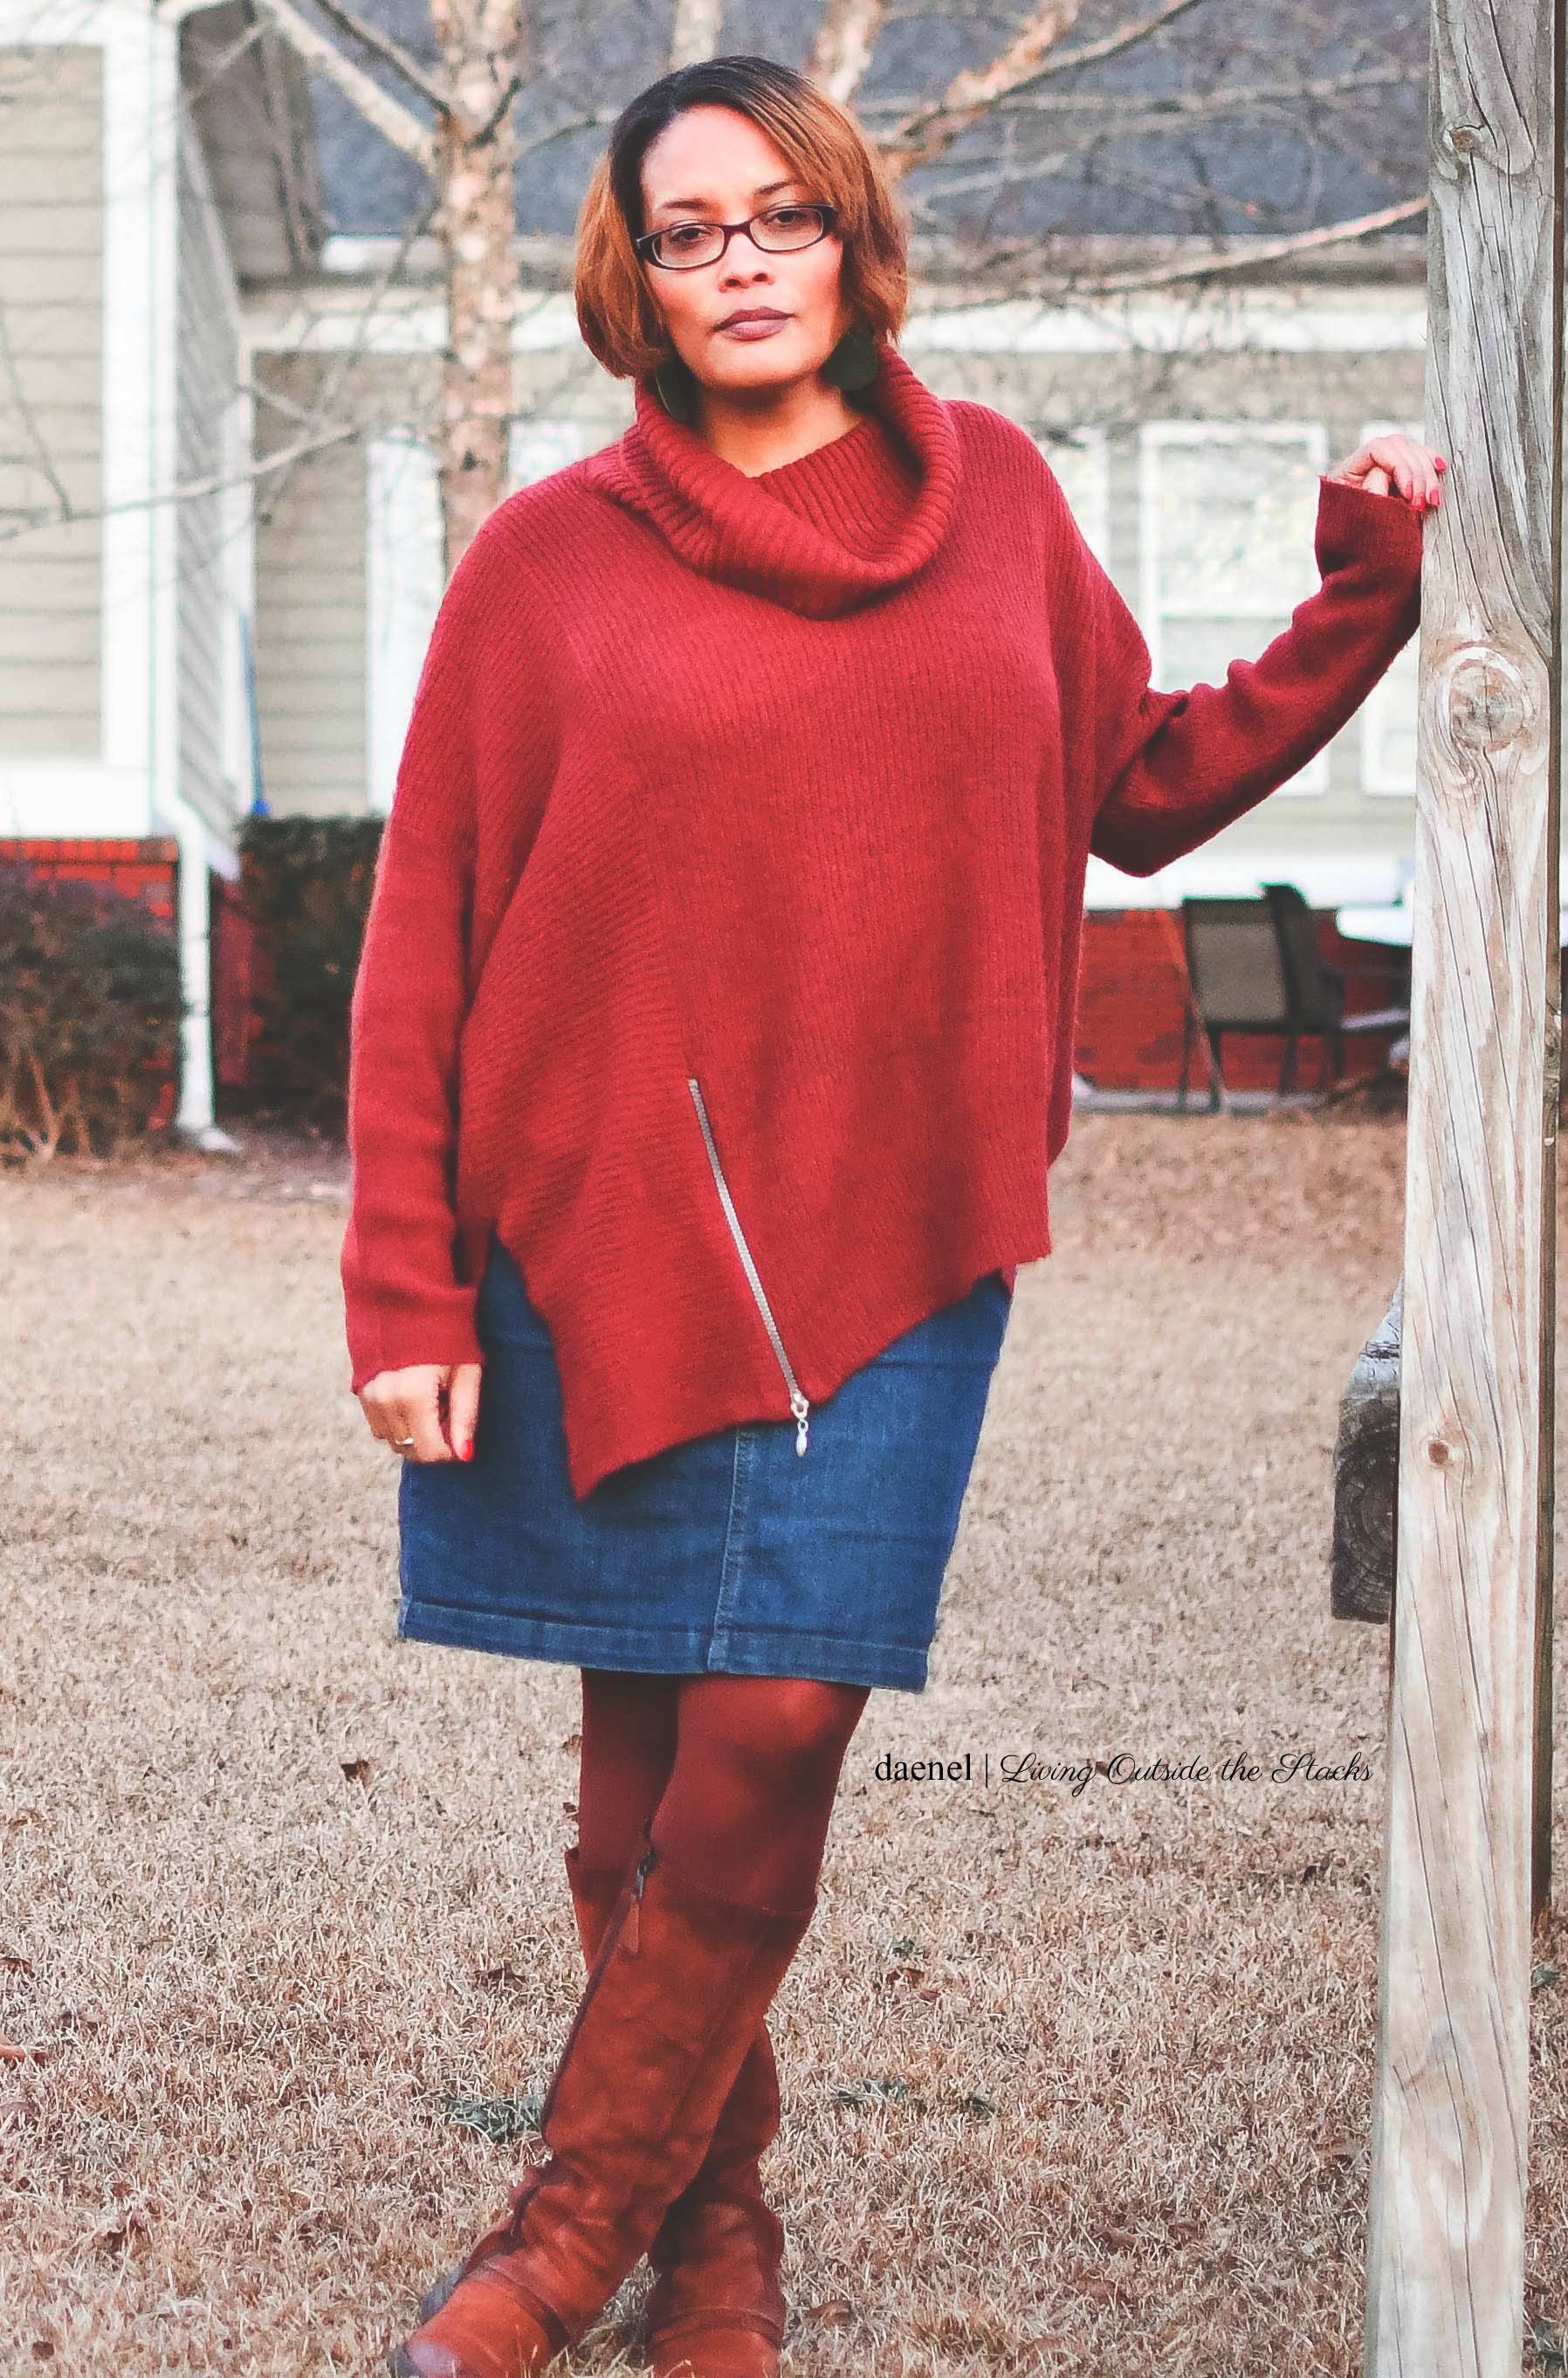 DAT_5863 Oversized Burgundy Sweater Denim Skirt Burgundy Tights and Brown Boots {living outside the stacks}